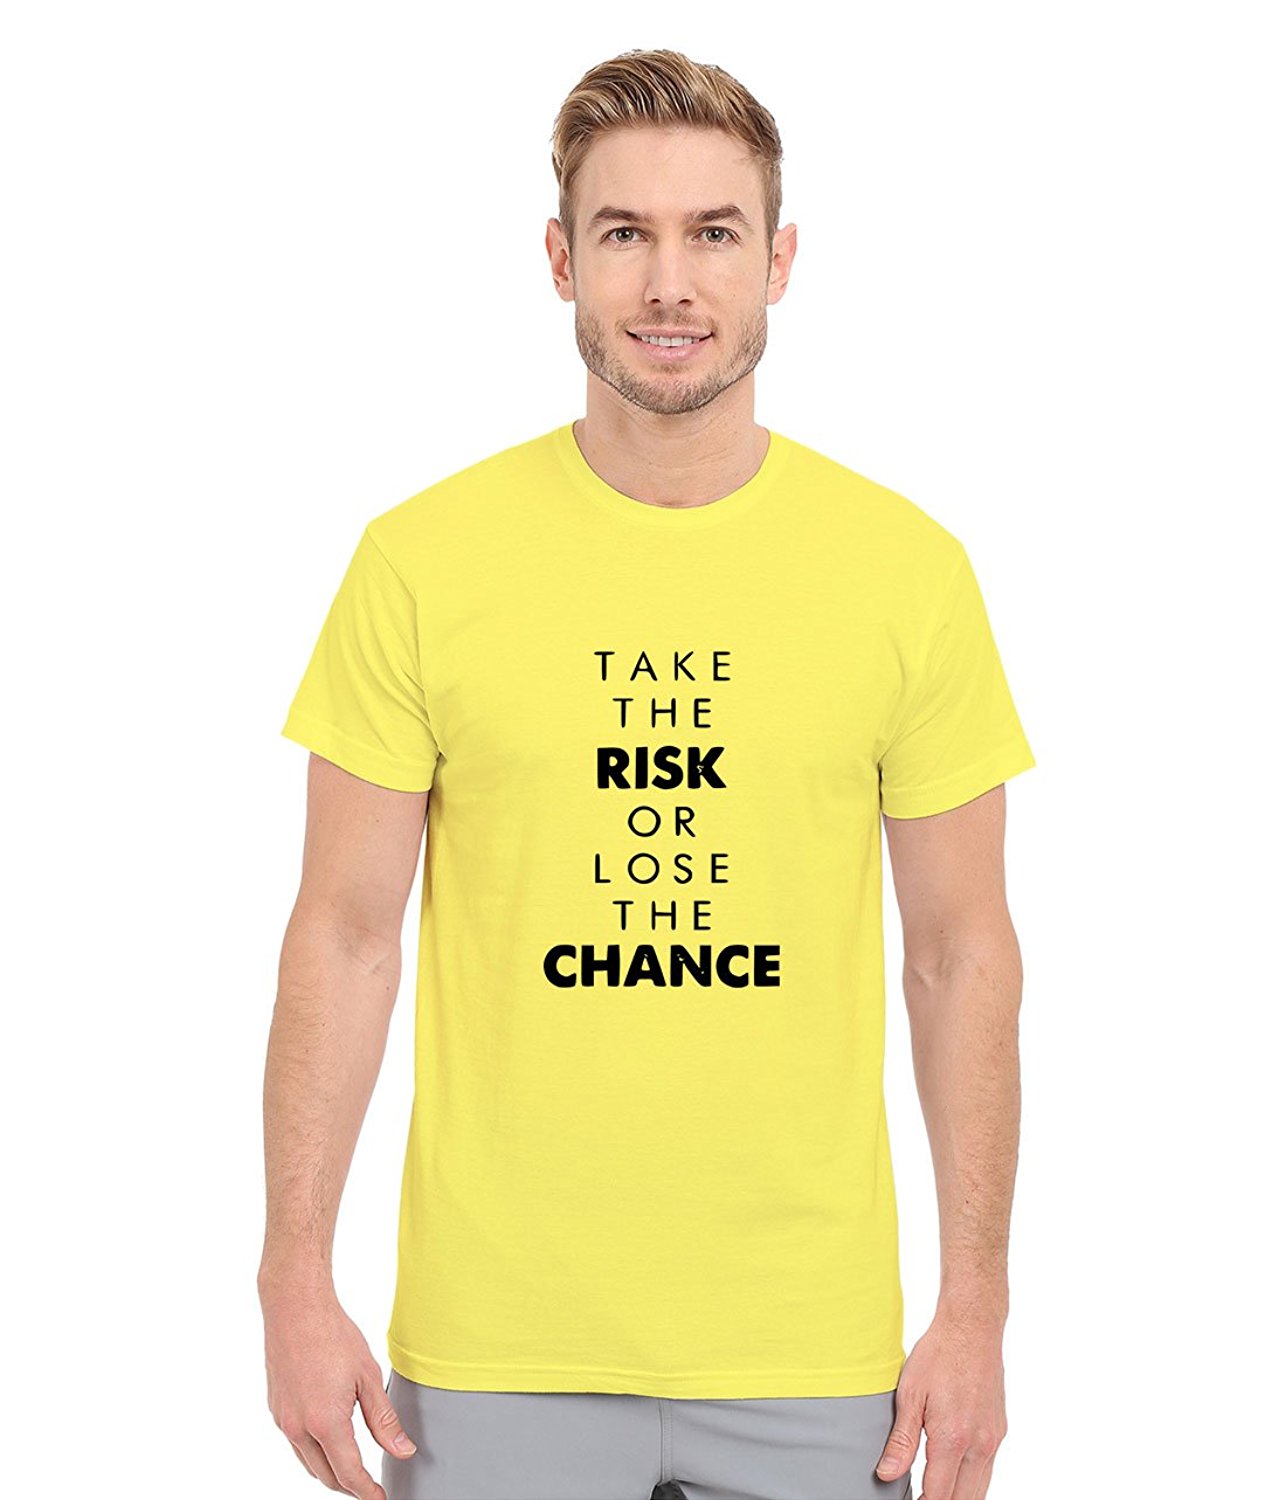 DOUBLE F ROUND NECK HALF SLEEVE TAKE RISK OR LOSE CHANCE WITH 09 COLORS PRINTED T-SHIRT FOR MEN